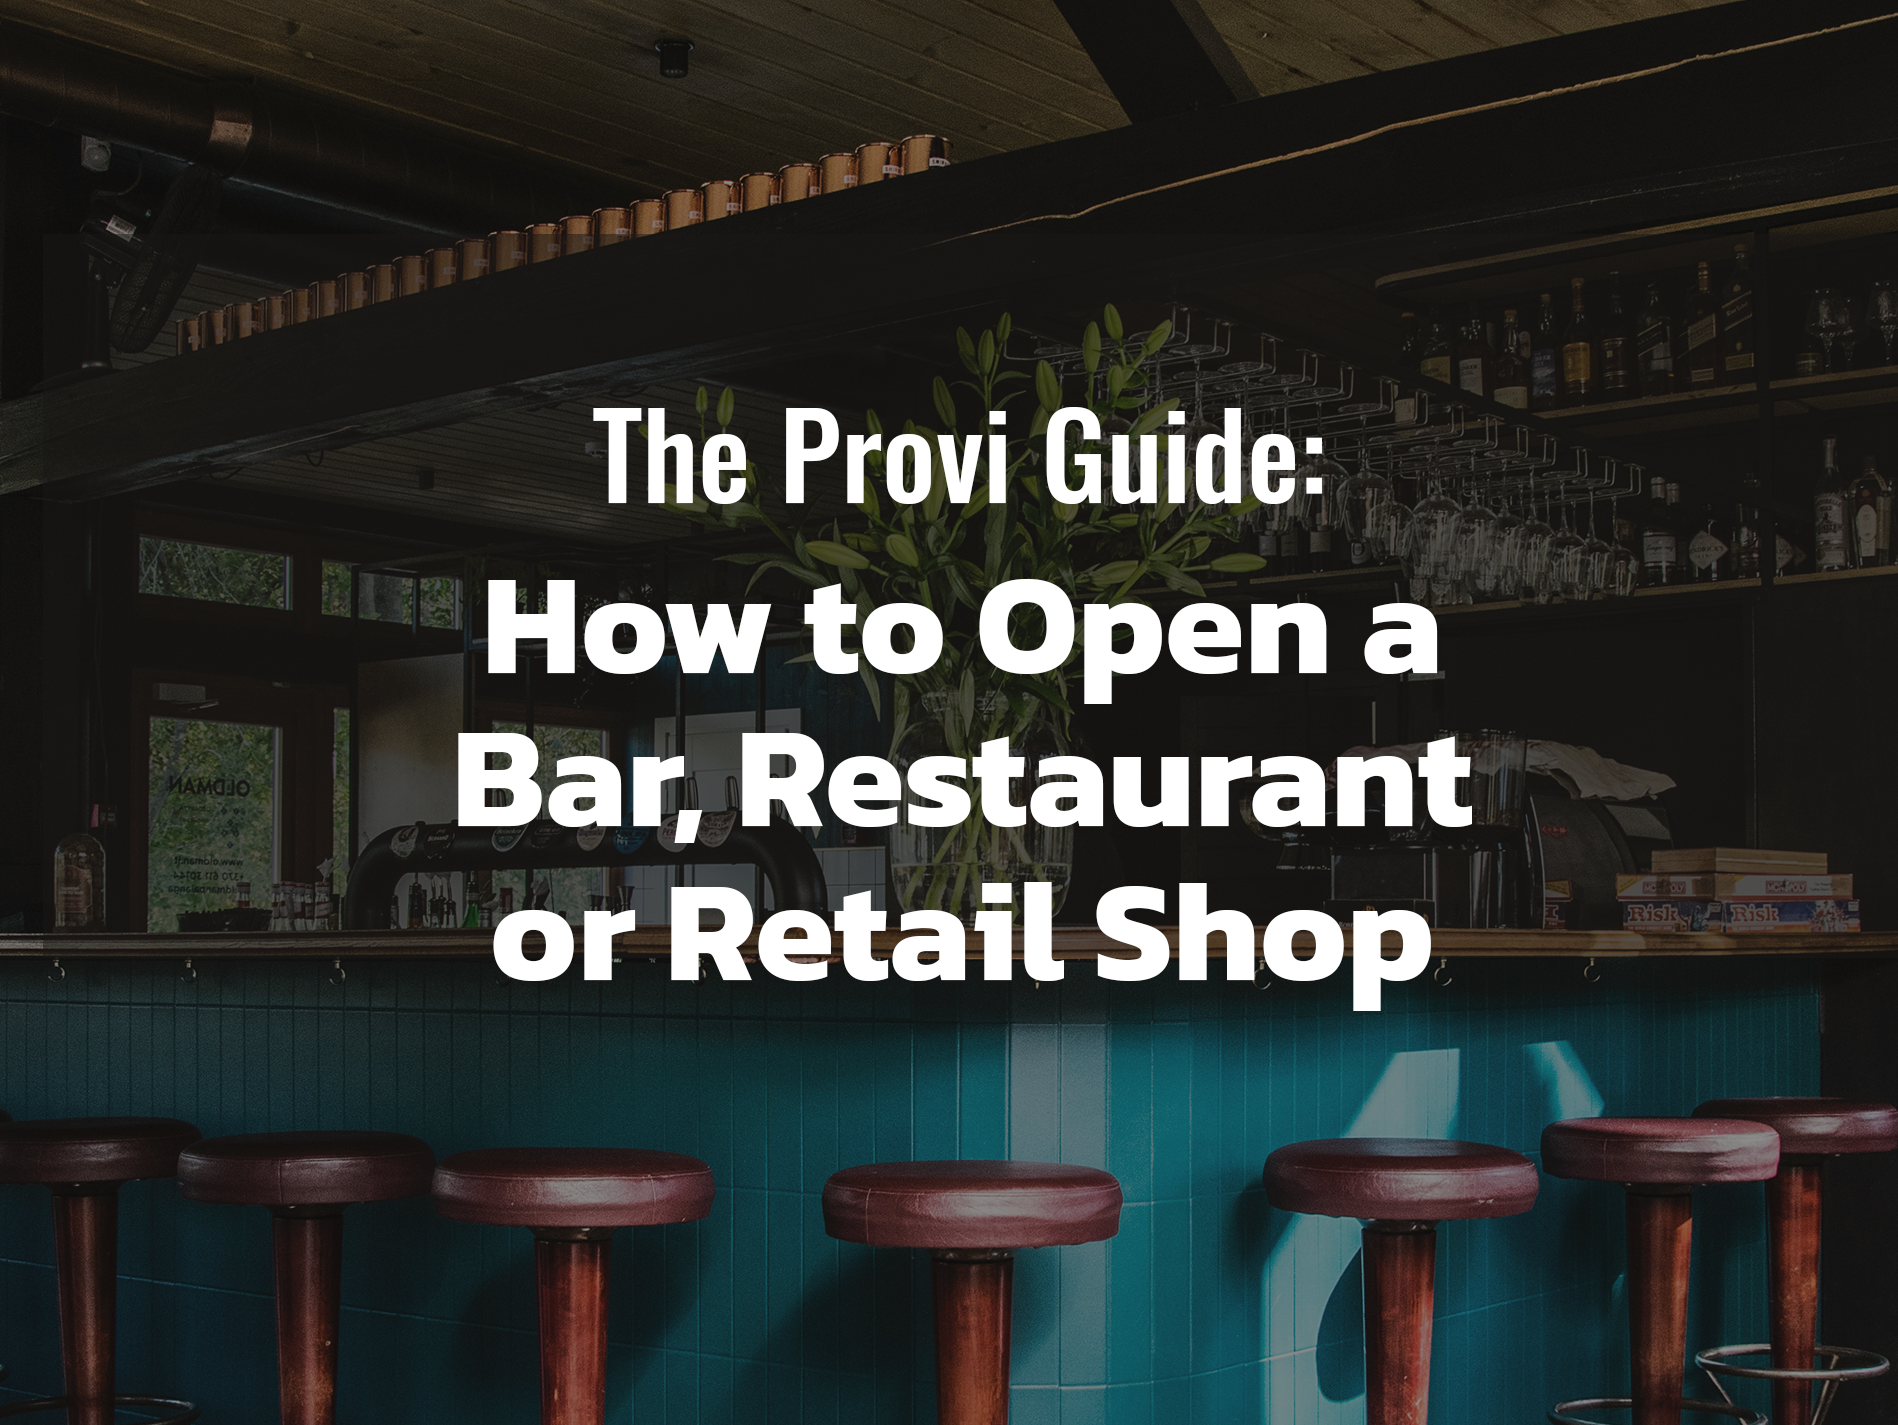 The Provi Guide: How To Open a Bar, Restaurant & Retail Shop